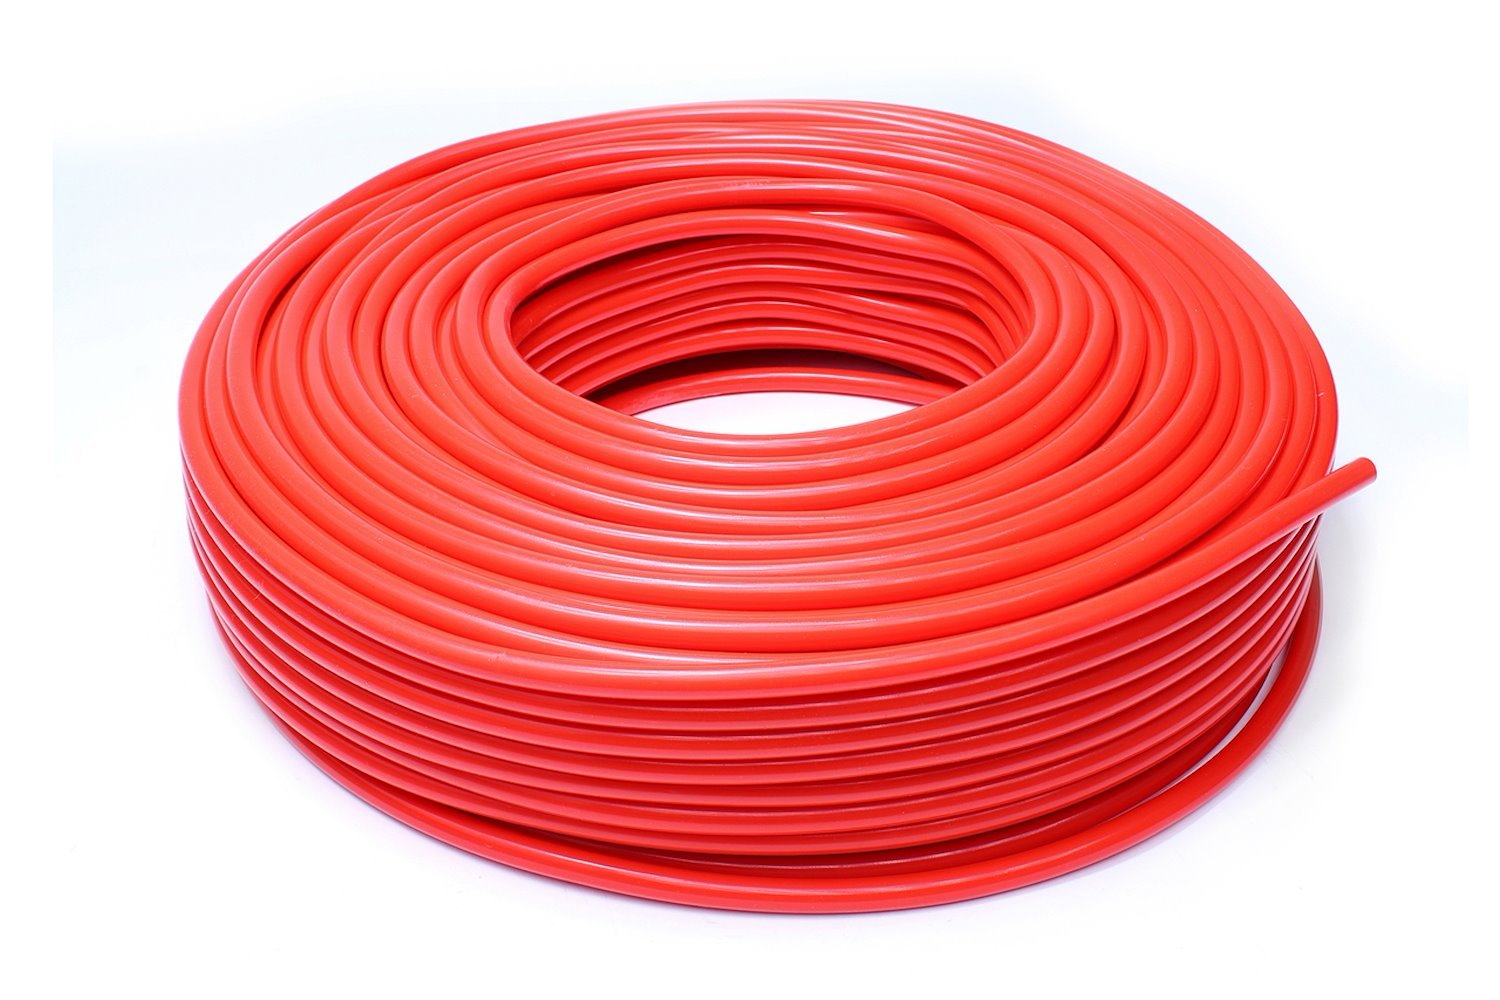 HTSVH5-REDx50 High-Temperature Silicone Vacuum Hose Tubing, 13/64 in. ID, 50 ft. Roll, Red